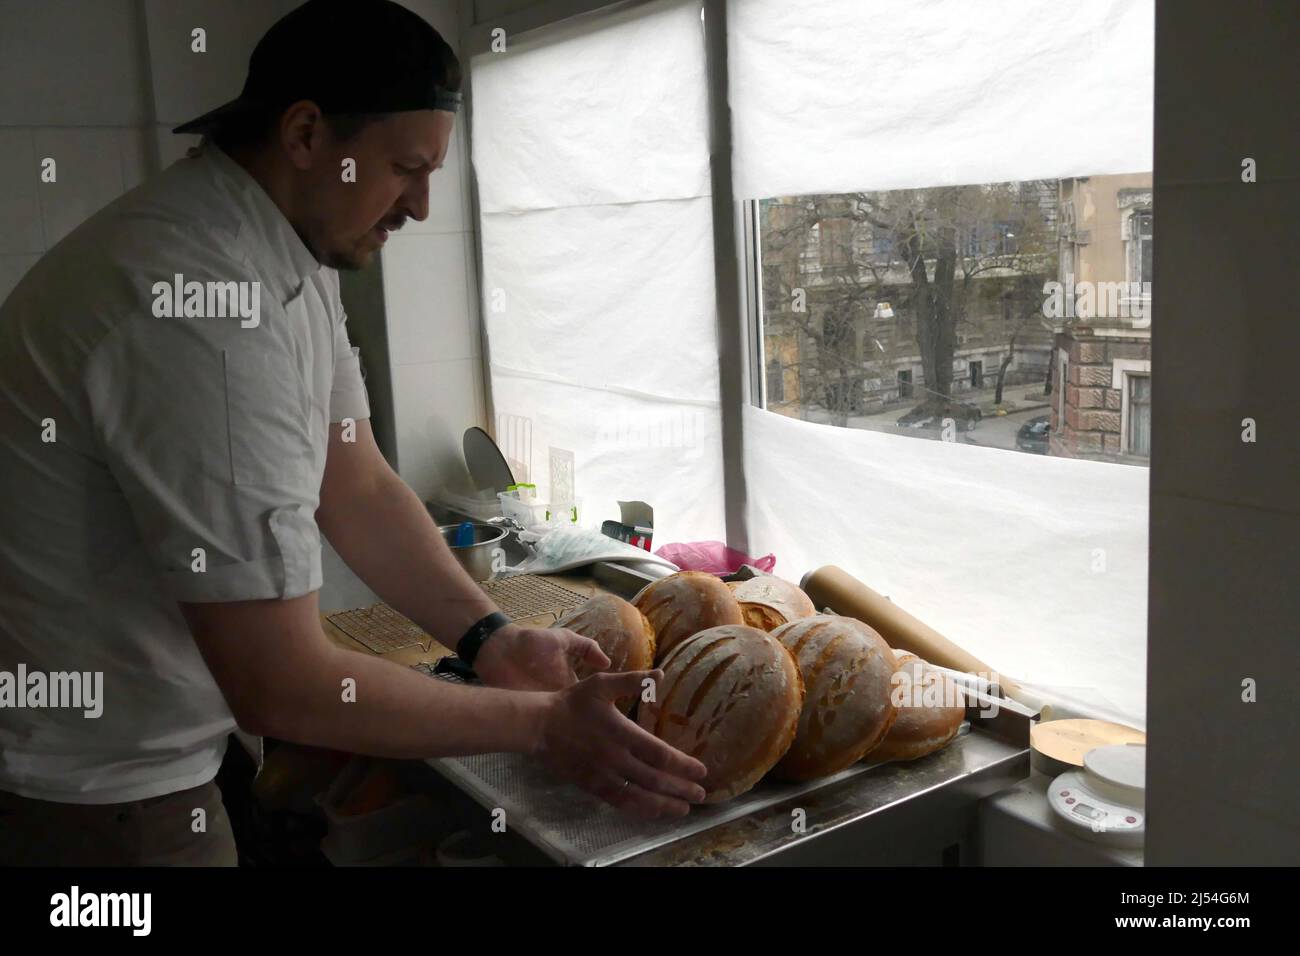 ODESA, UKRAINE - APRIL 18, 2022 - Baker Oleksii Babenko arranges bread loaves on a tray at a local bakery that makes bread decorated with the tryzub, Stock Photo